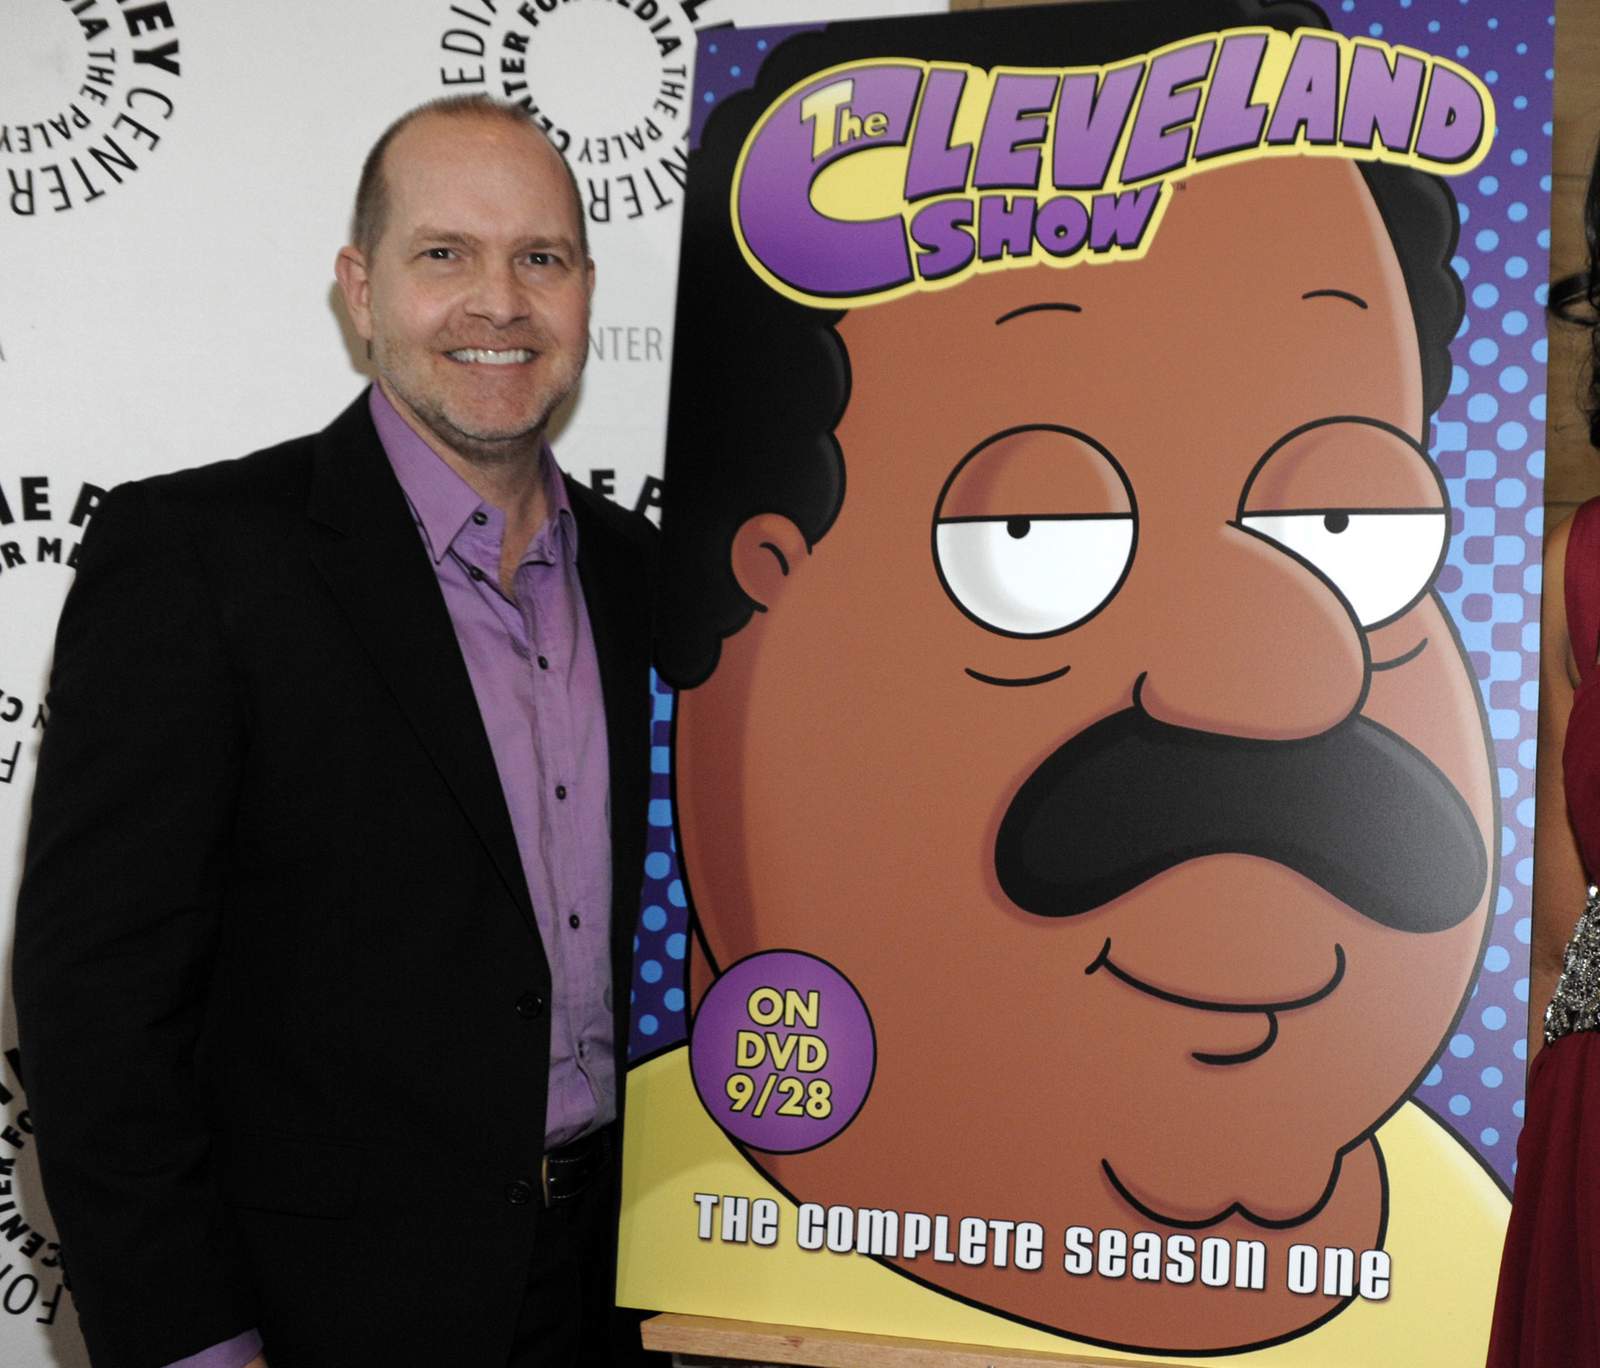 Mike Henry to stop voicing Black character on 'Family Guy'